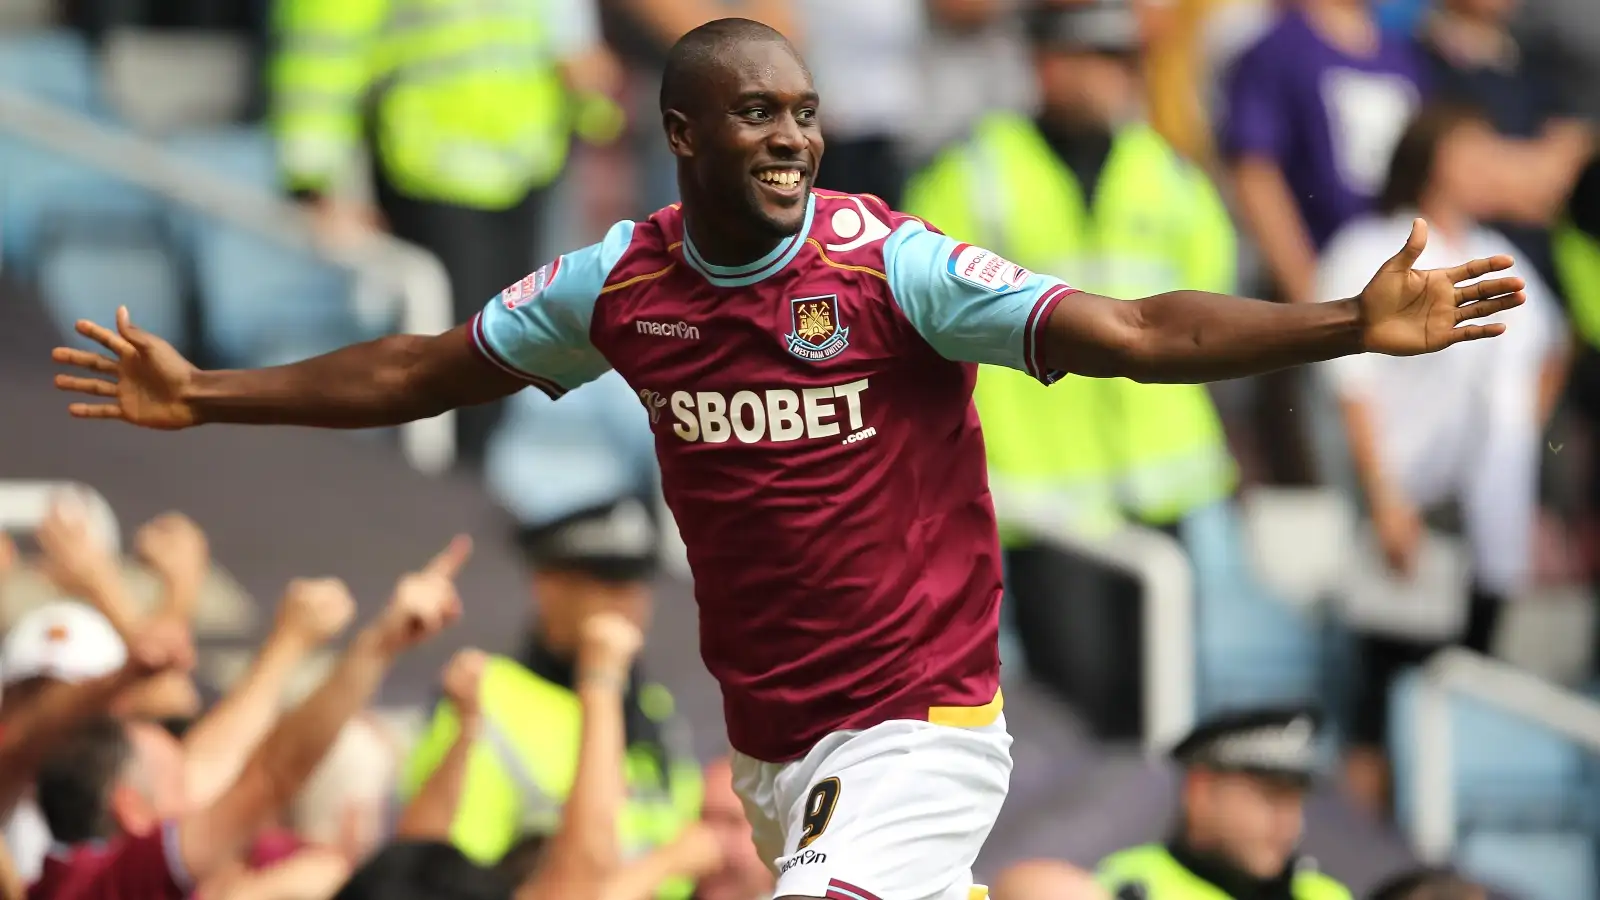 An ode to Carlton Cole, mystery box striker who was only ever world class or awful